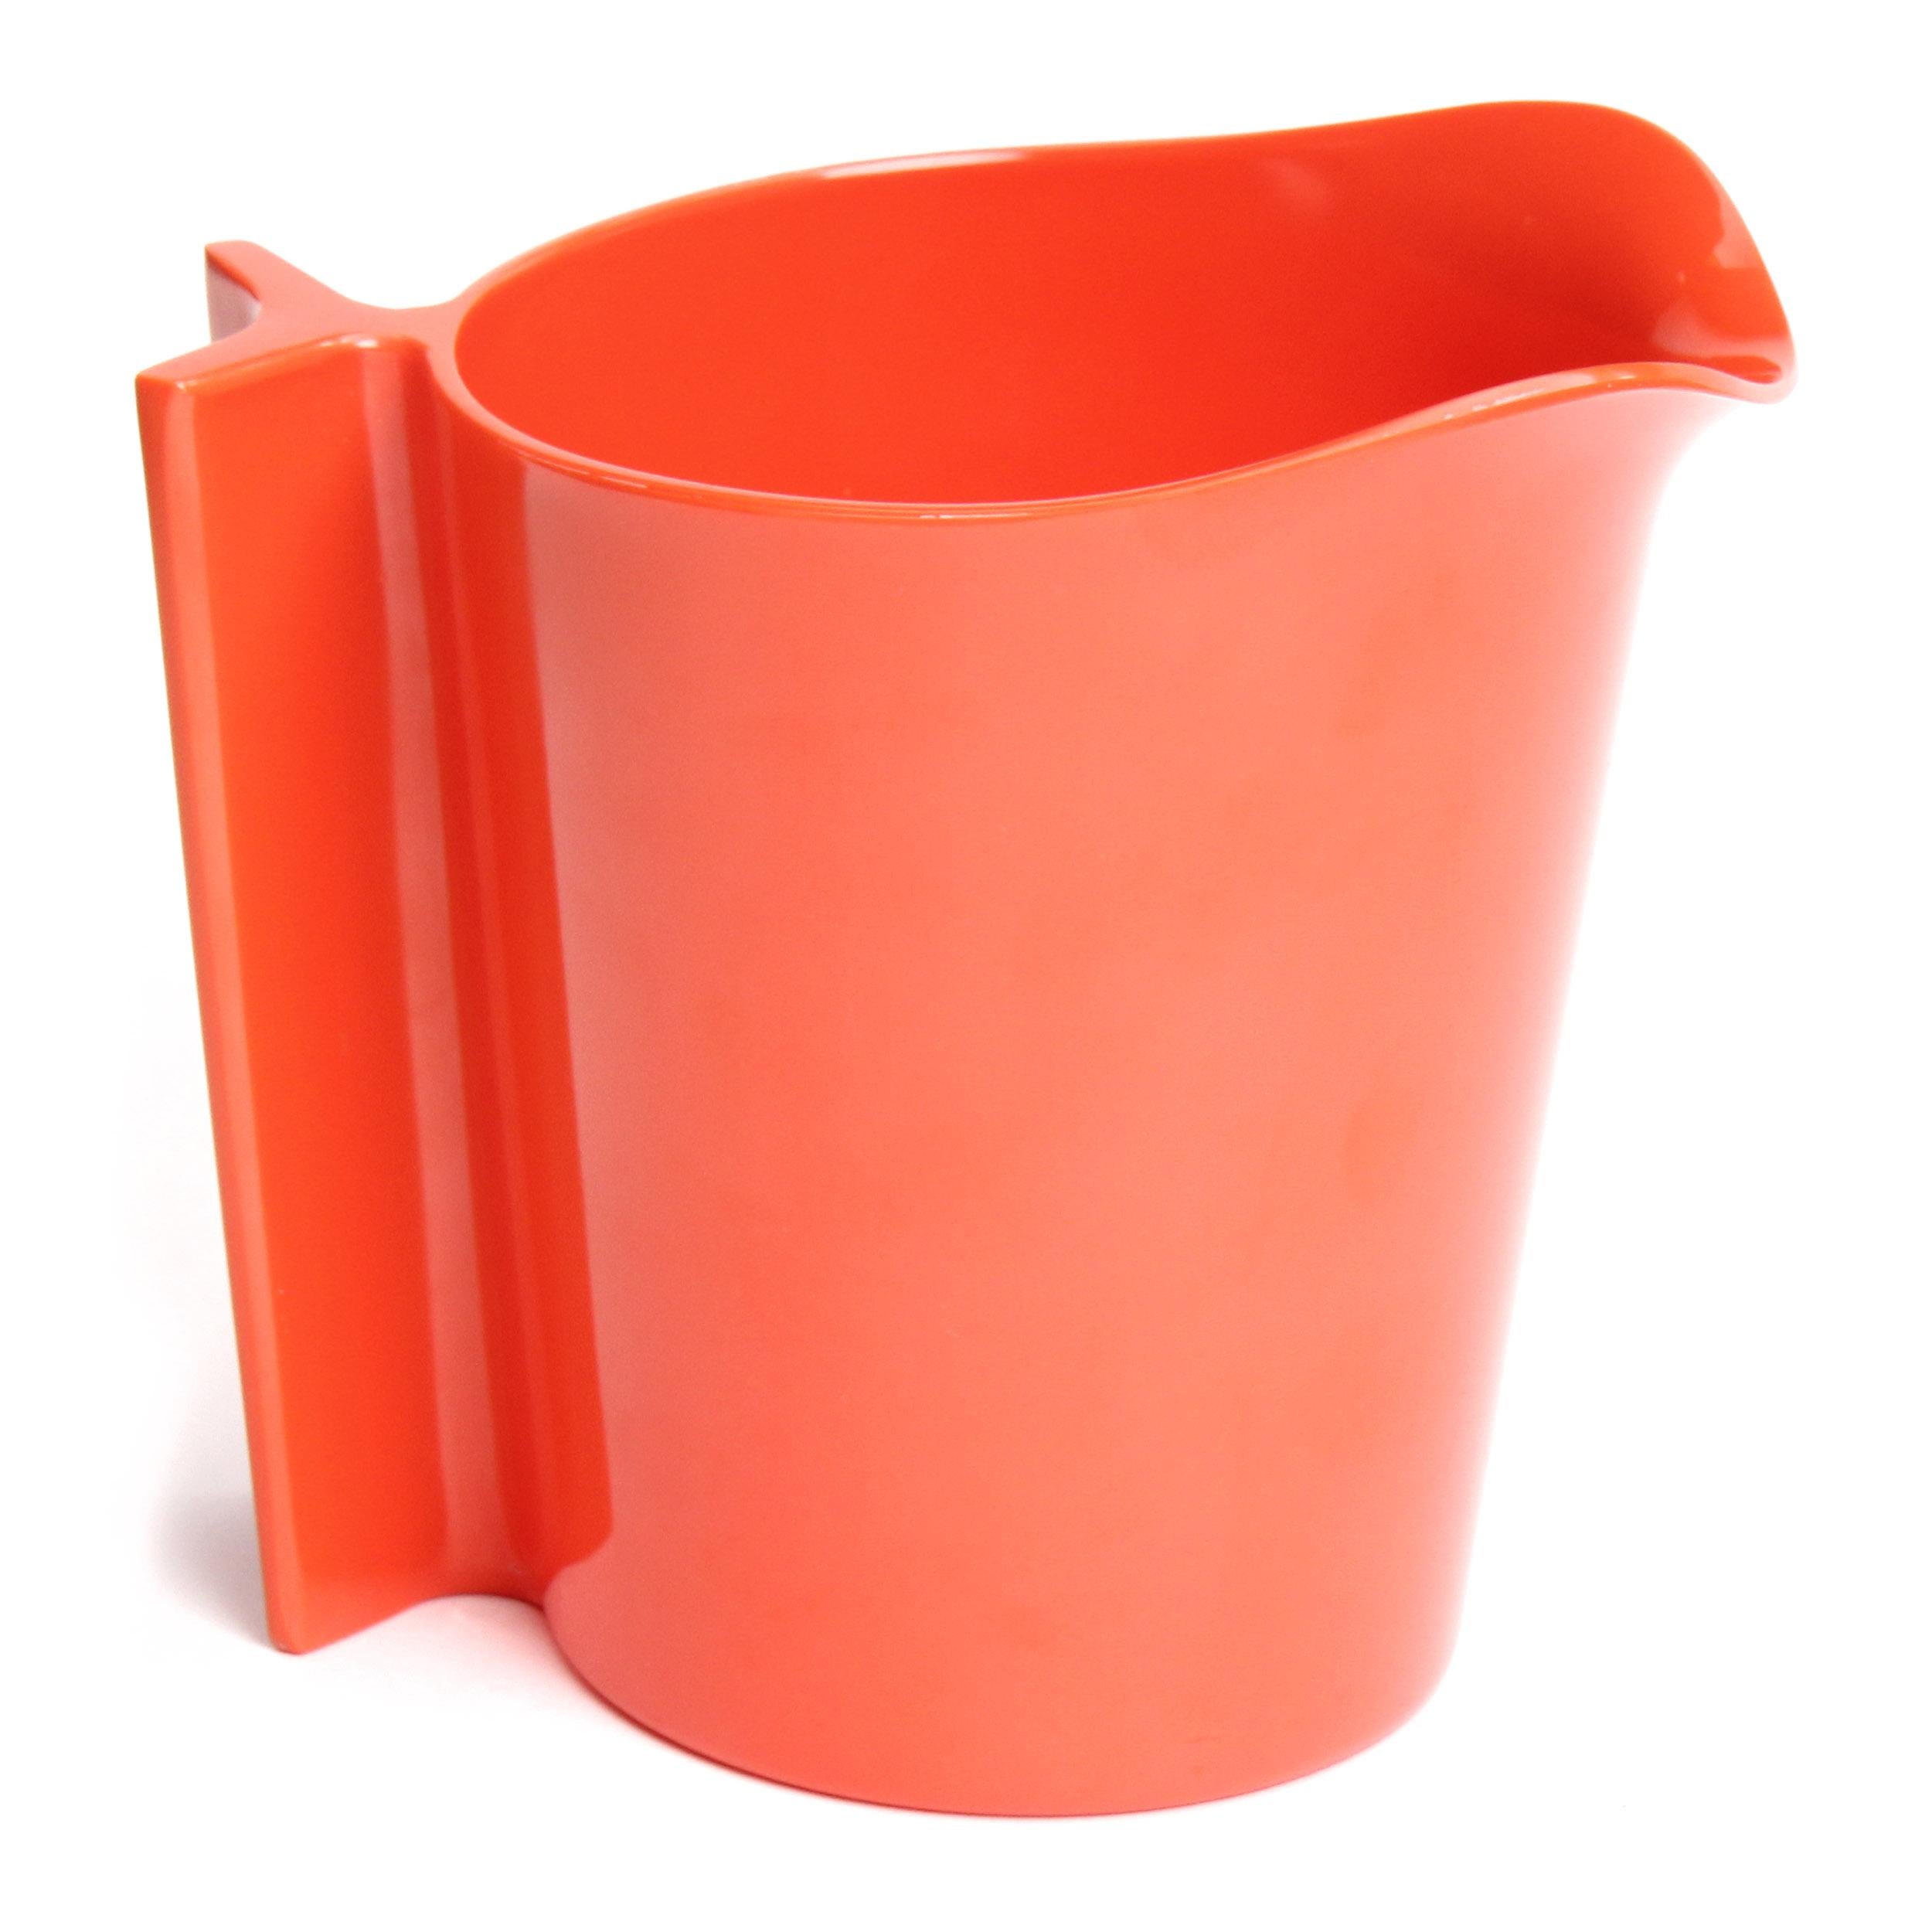 An expressive, uncommon and sculptural pitcher finely executed in vibrant orange plastic.